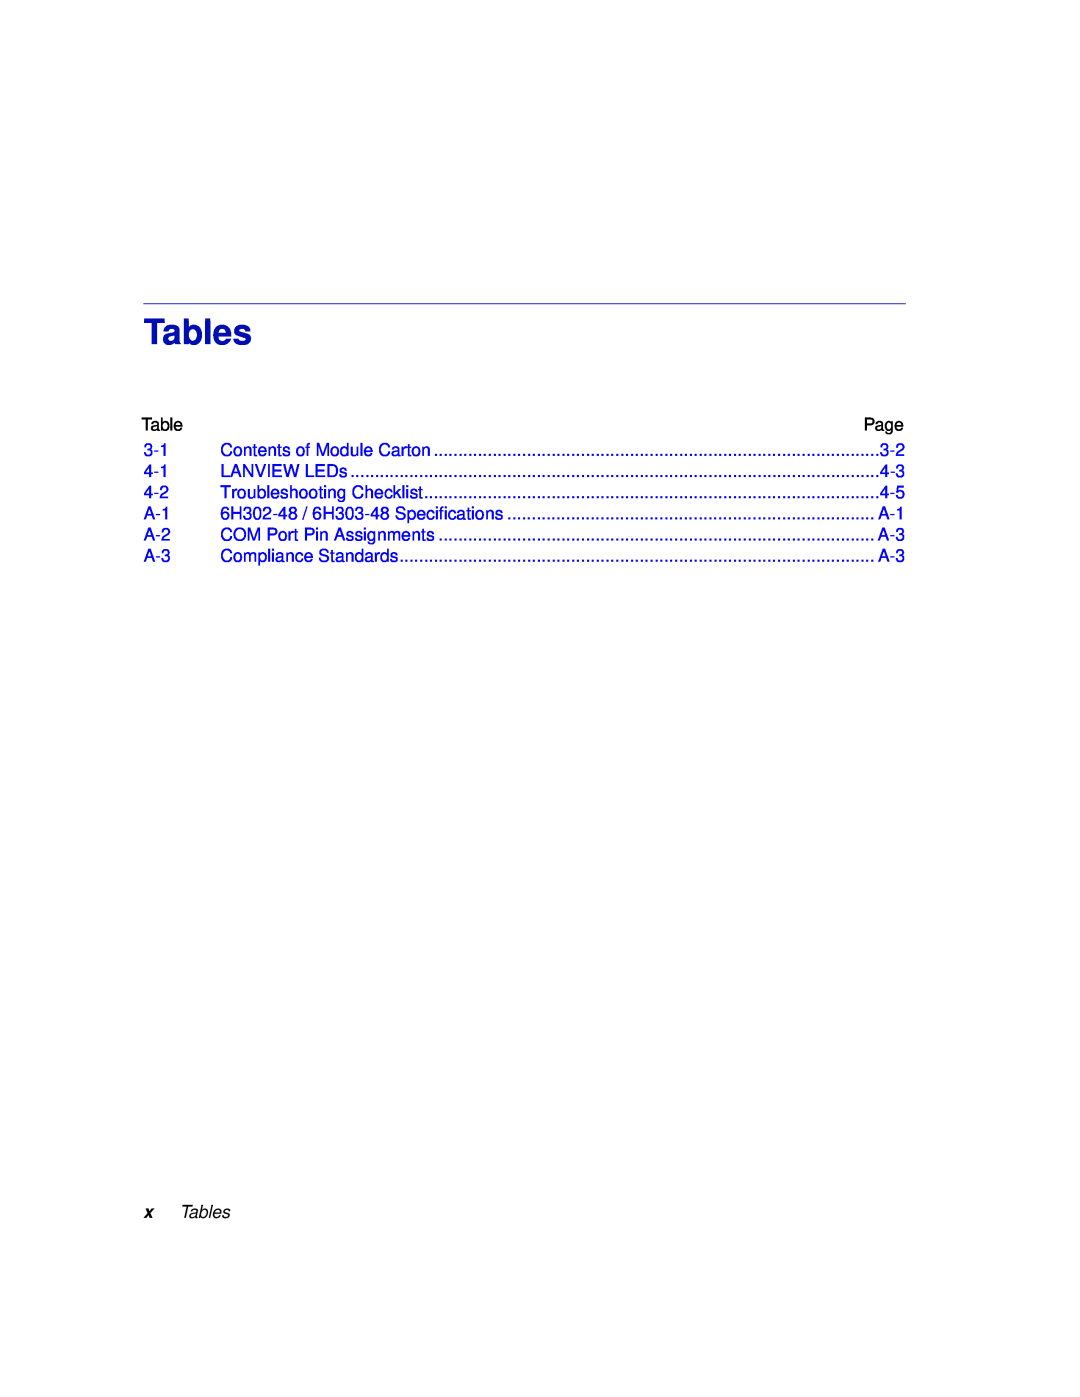 Enterasys Networks 6H302-48 manual x Tables 